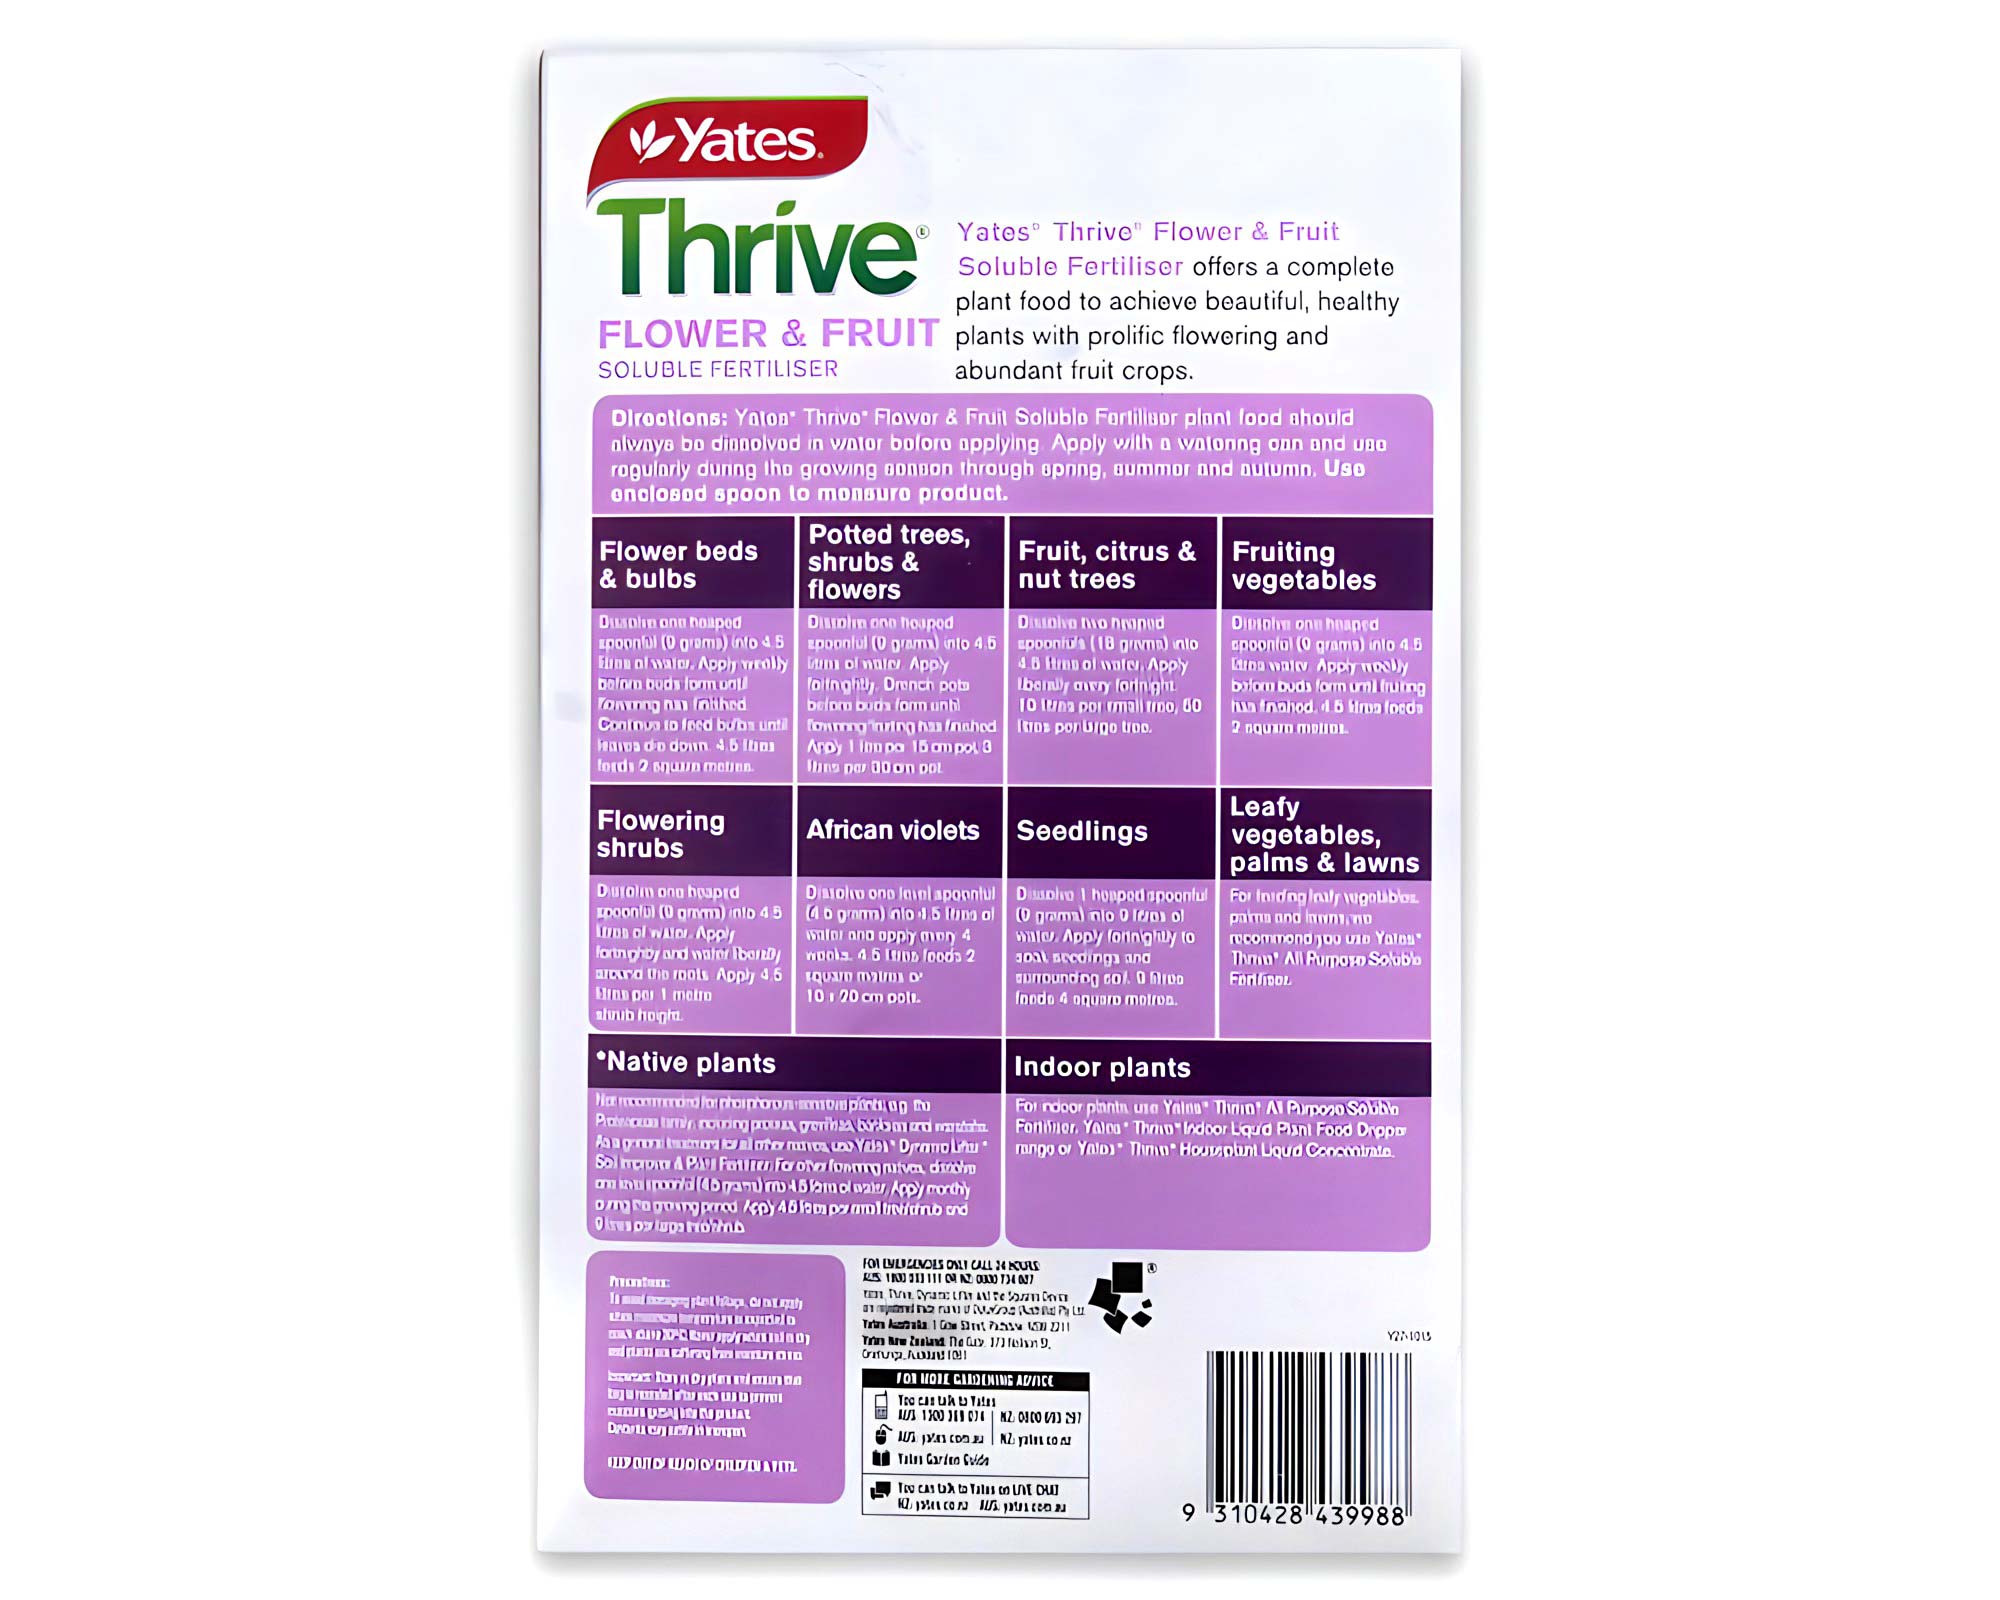 Thrive Flower and Fruit Pack Rear Panel